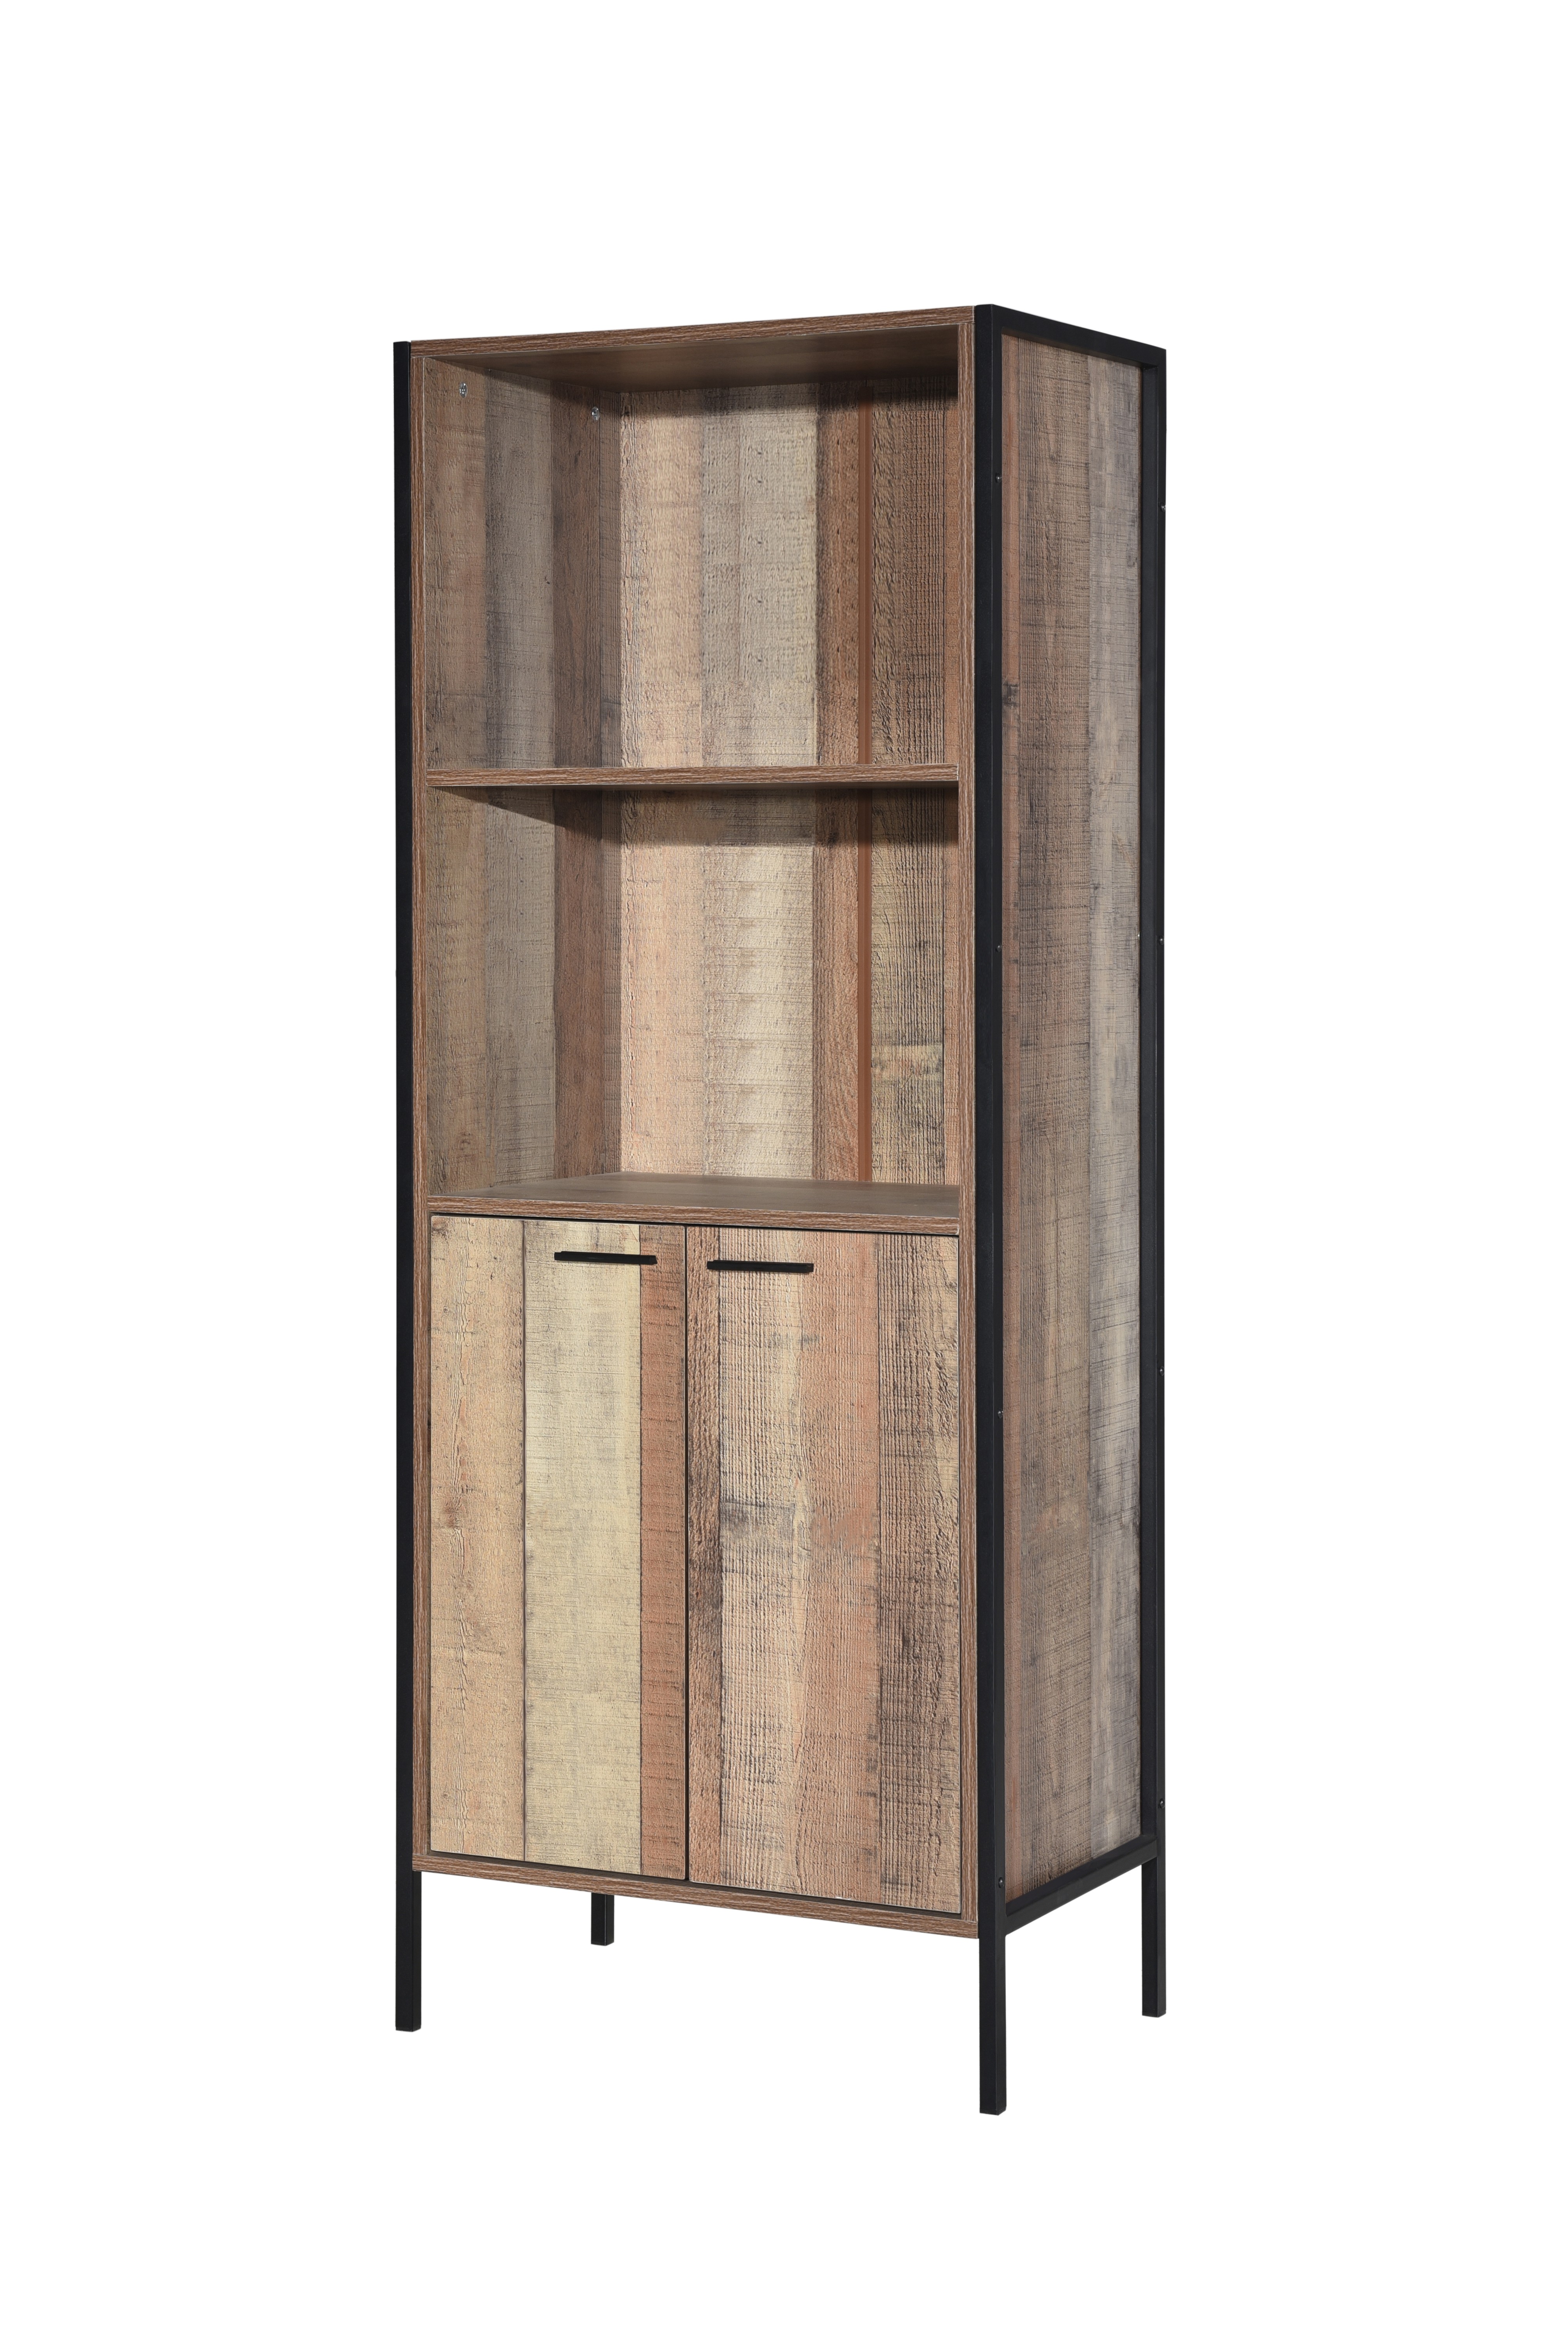 Hoxton Bookcase-Display Cabinet